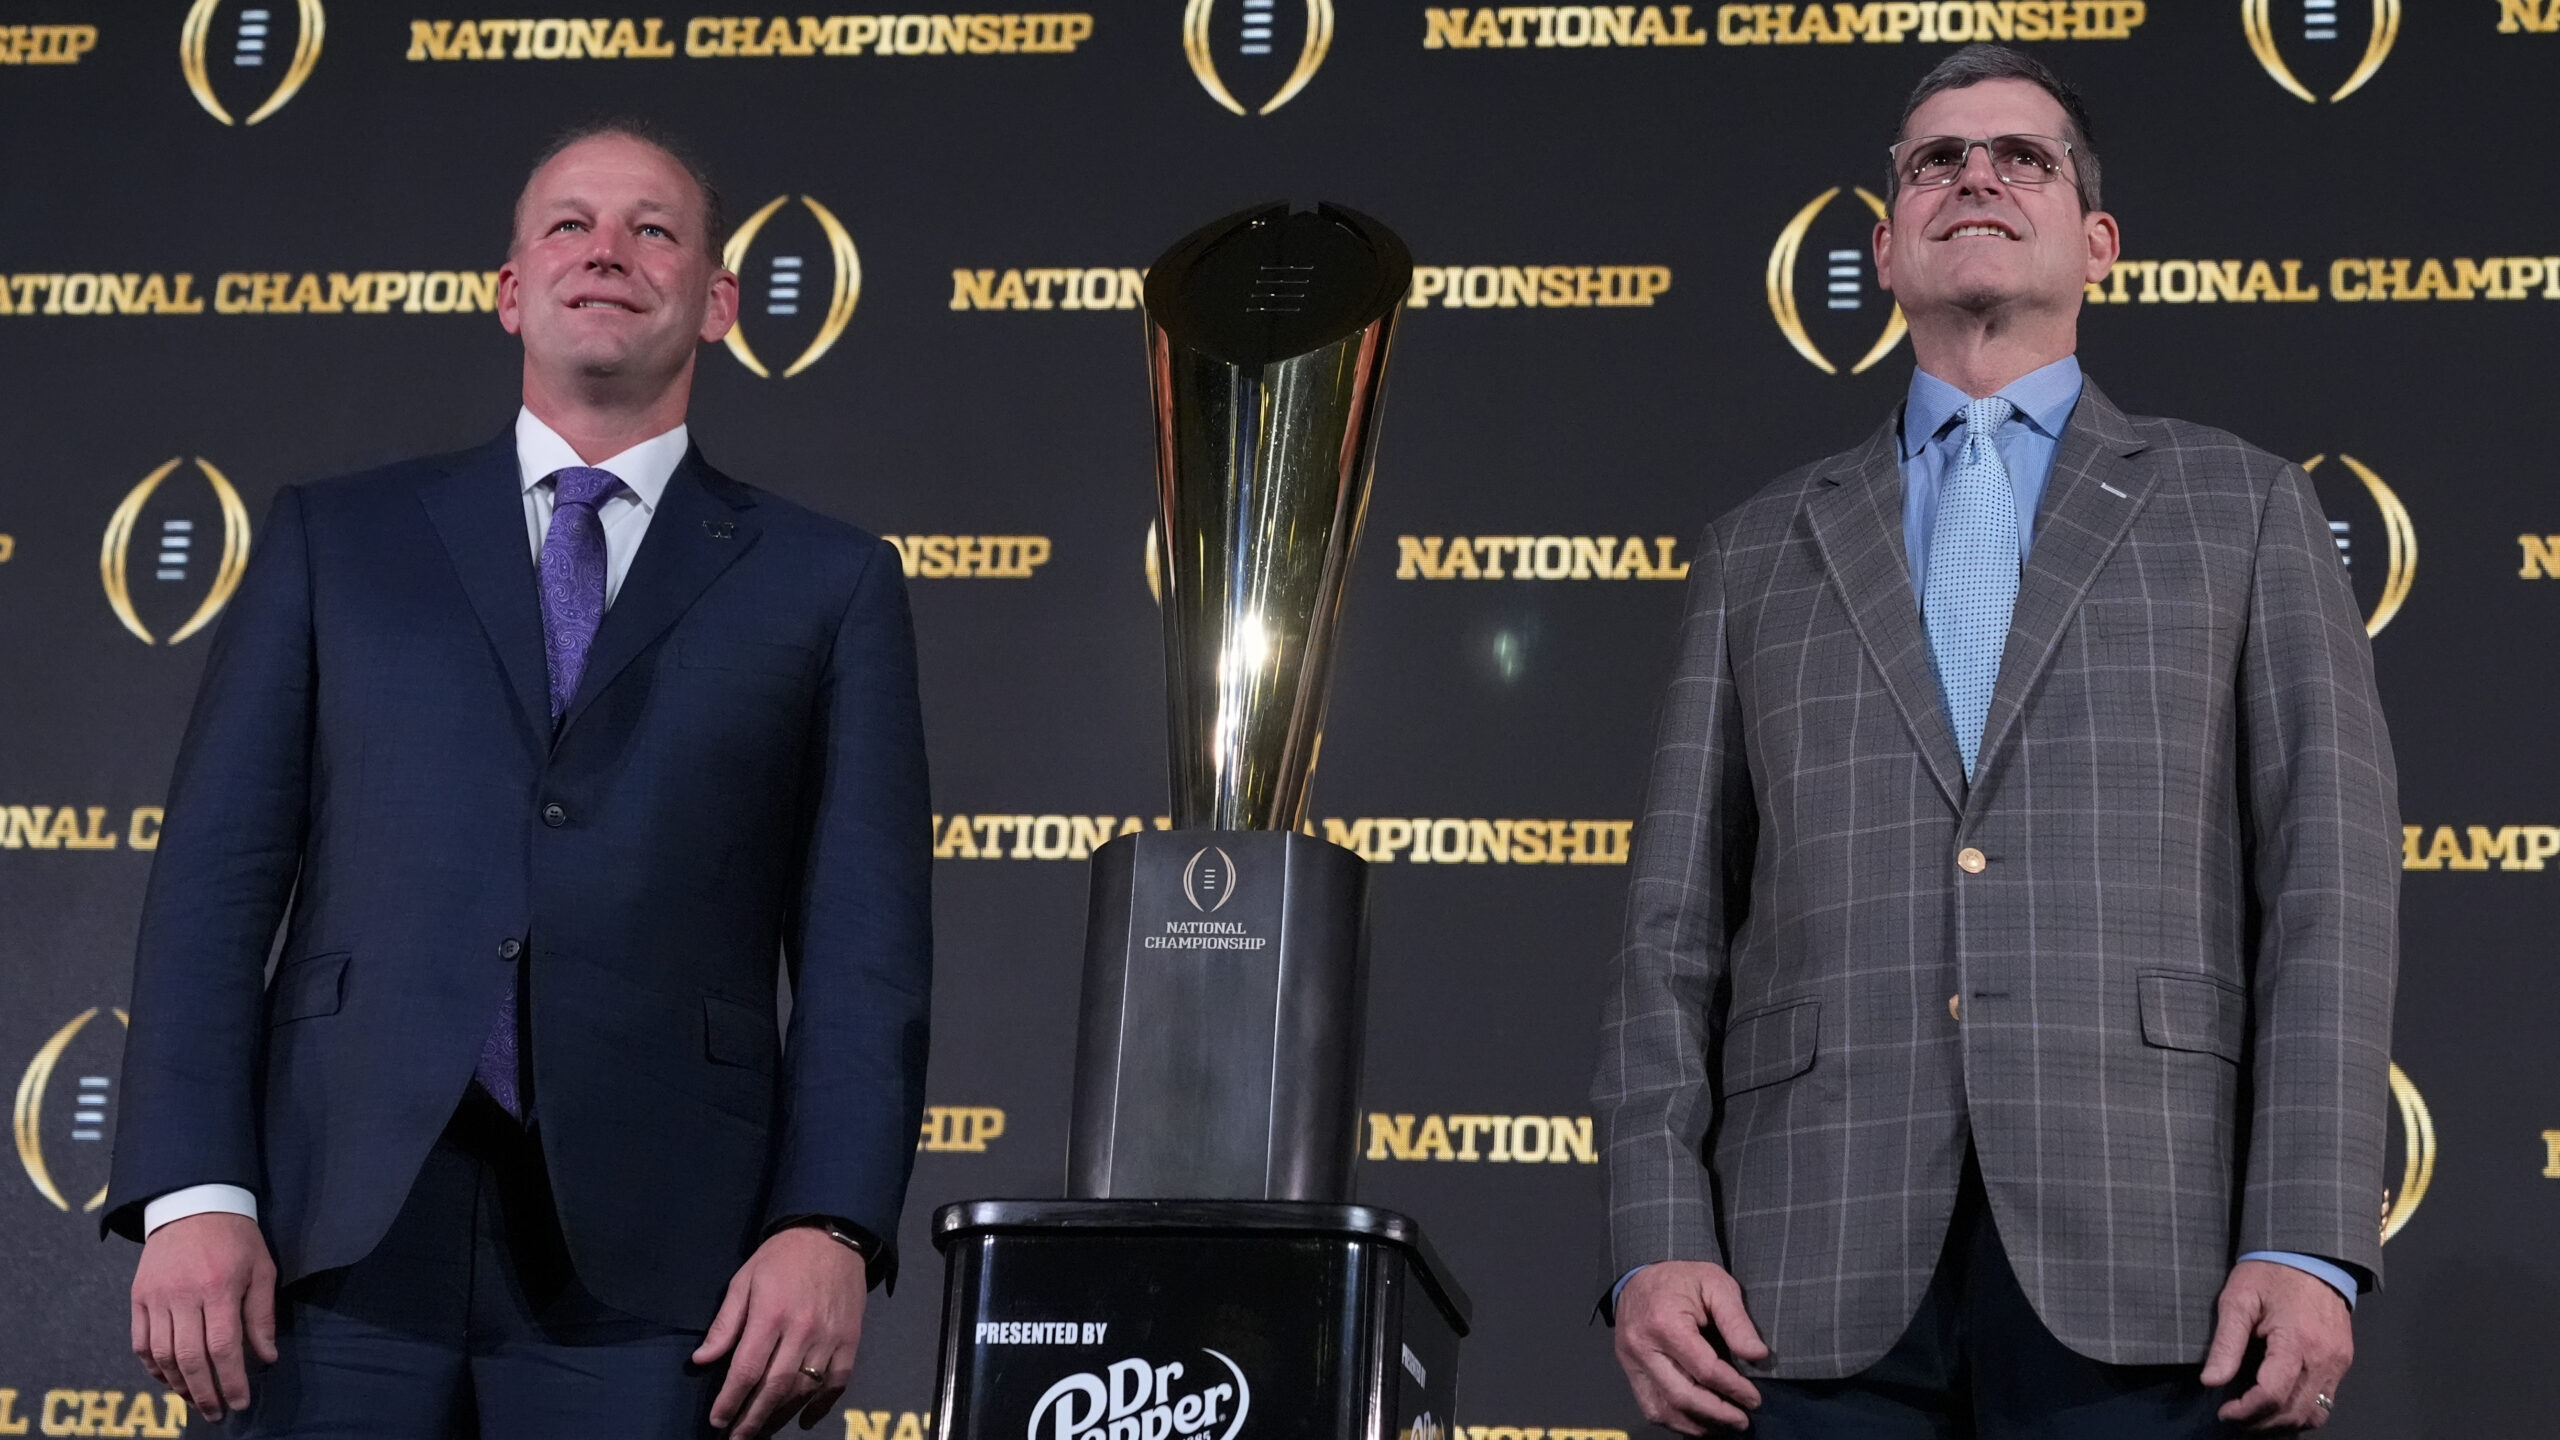 What to know as Michigan and Washington face off in the college football championship